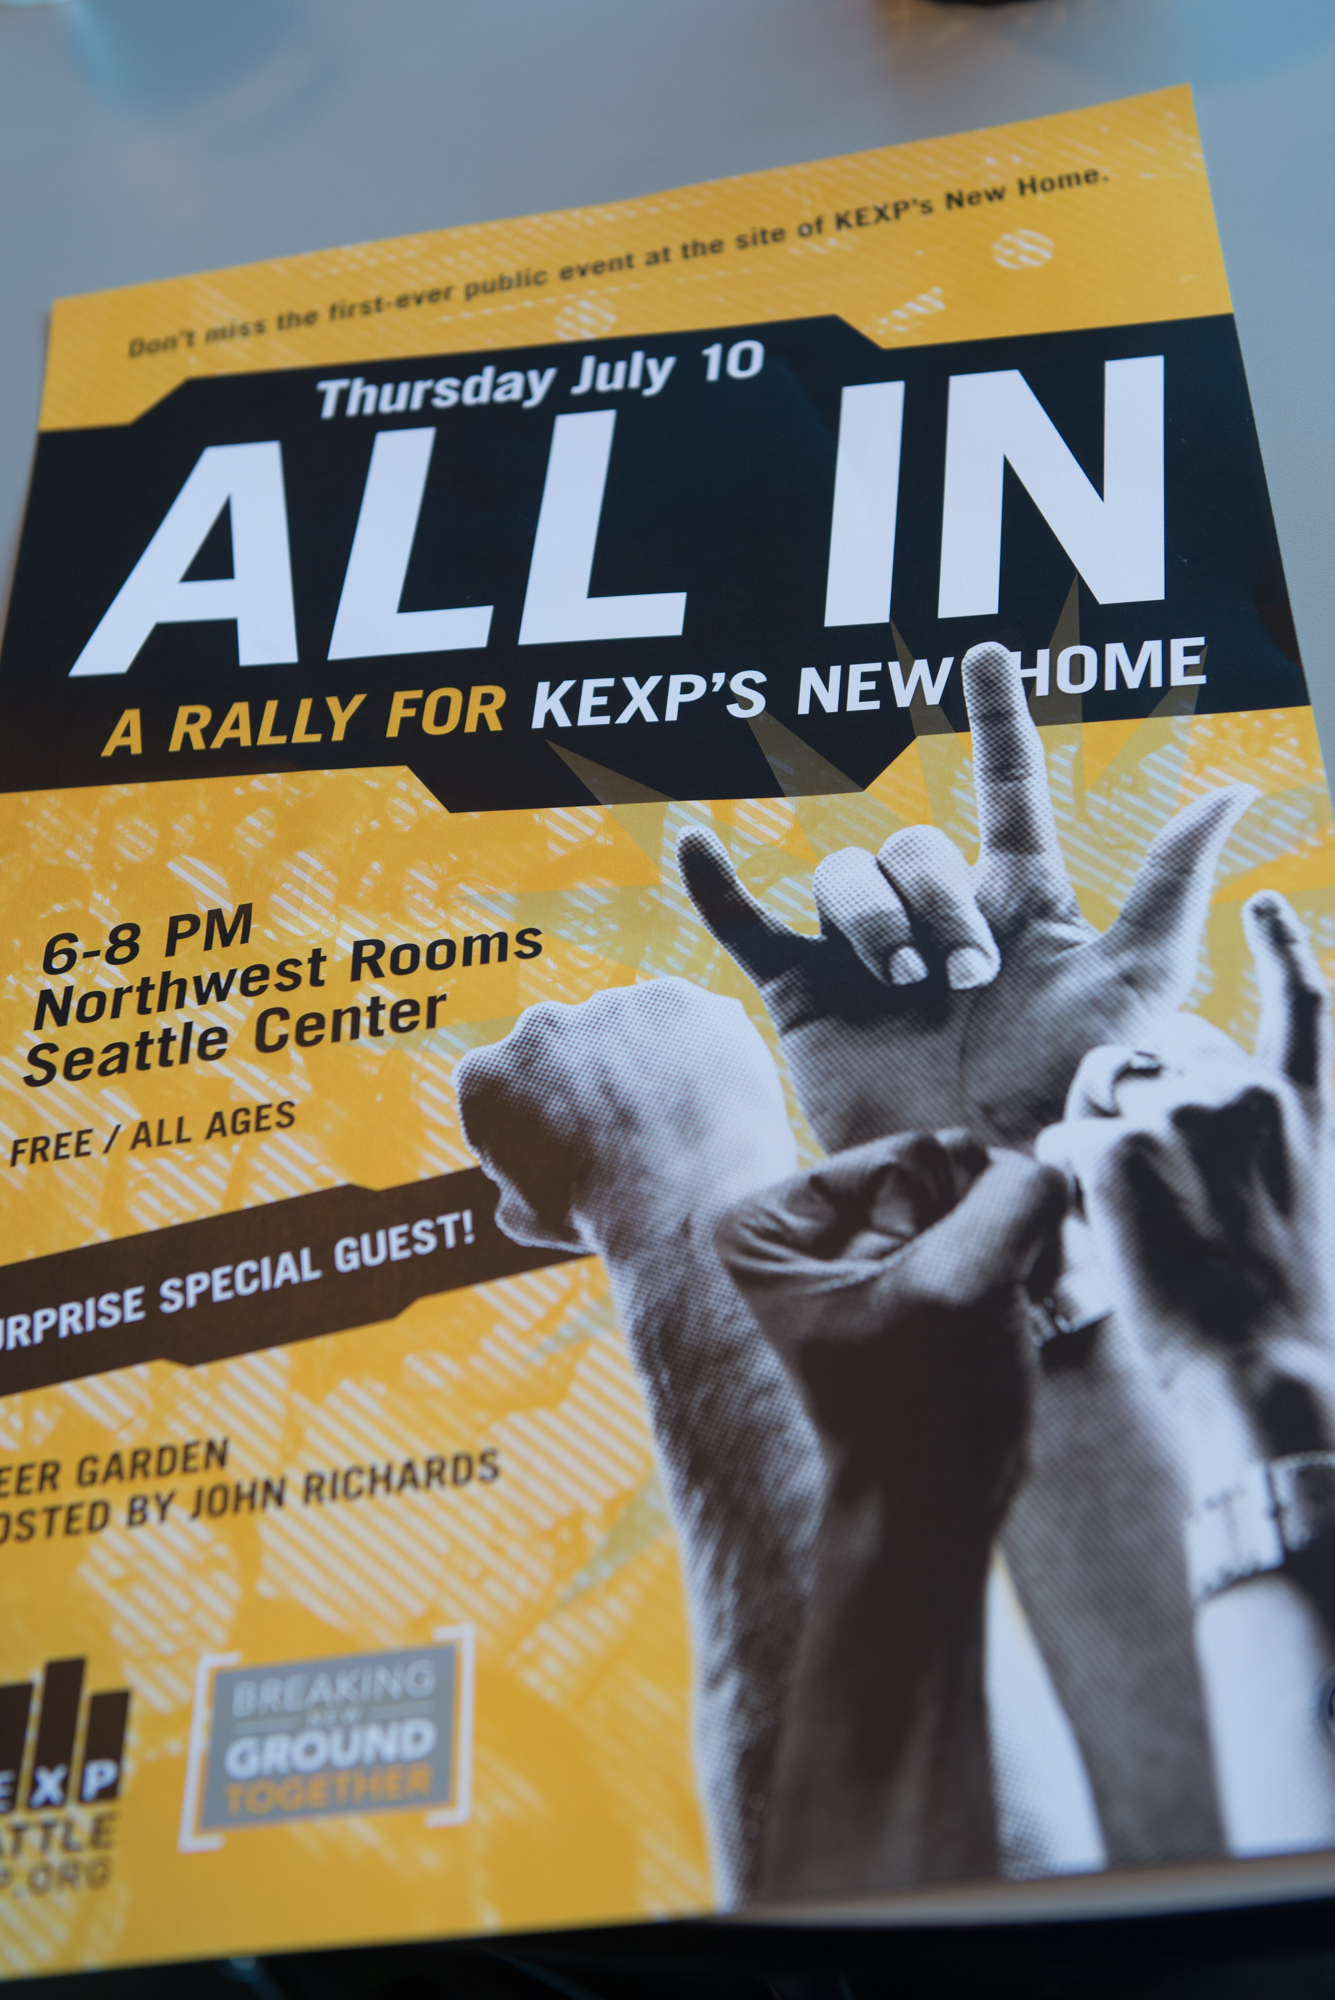 The new fundraising campaign is "All In" to get KEXP the rest of the funds to create the new location.